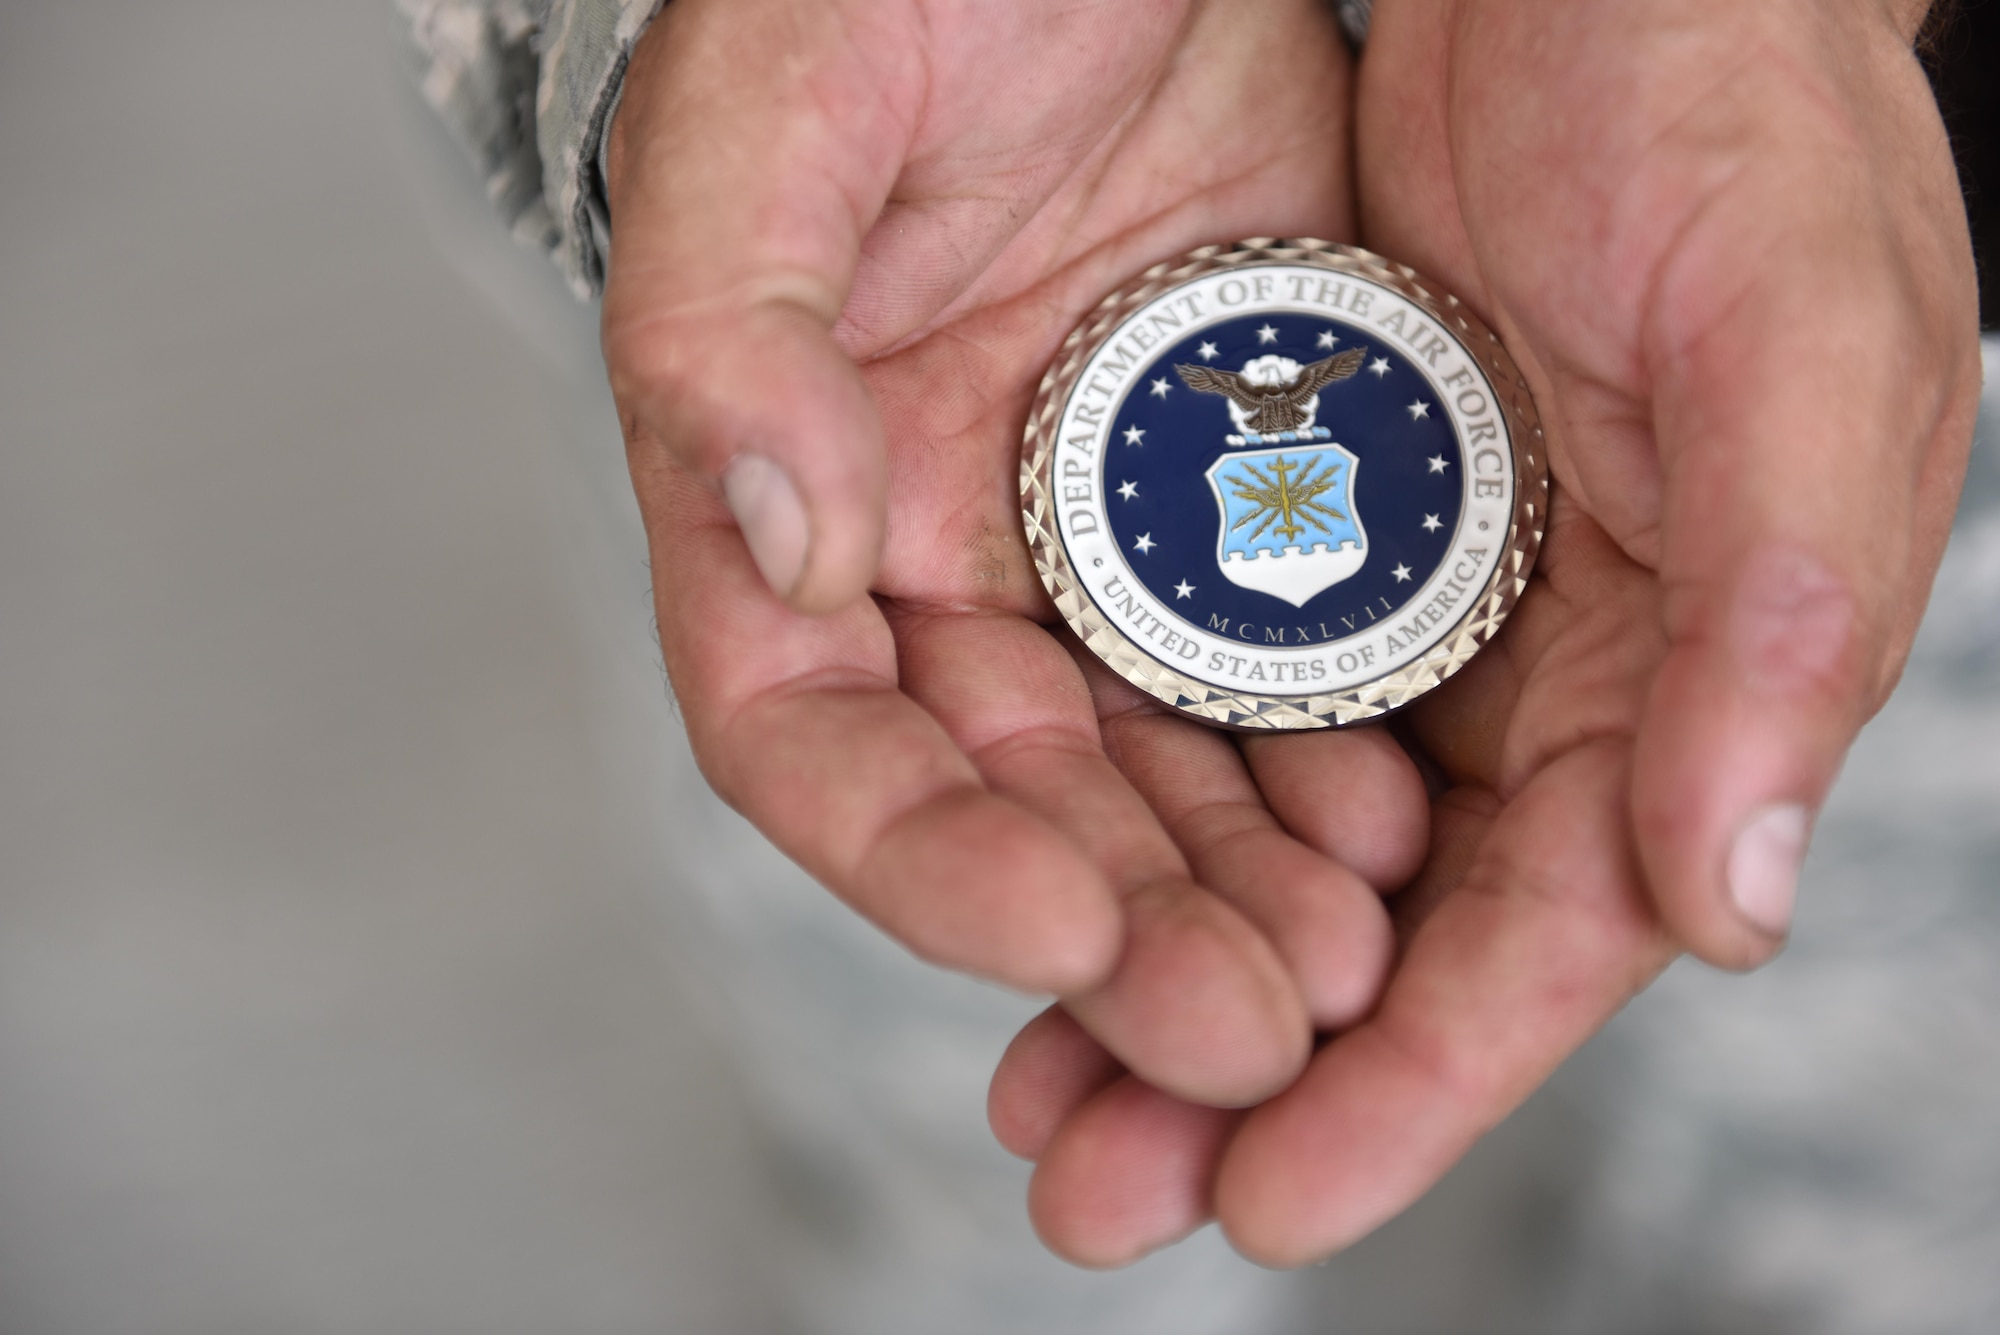 Staff Sgt. Kyle Yoder of the 380th Expeditionary Aircraft Maintenance Squadron holds out a coin awarded to him by Secretary of the Air Force Heather Wilson at Al Dhafra Air Base, United Arab Emirates, Aug. 18, 2017.